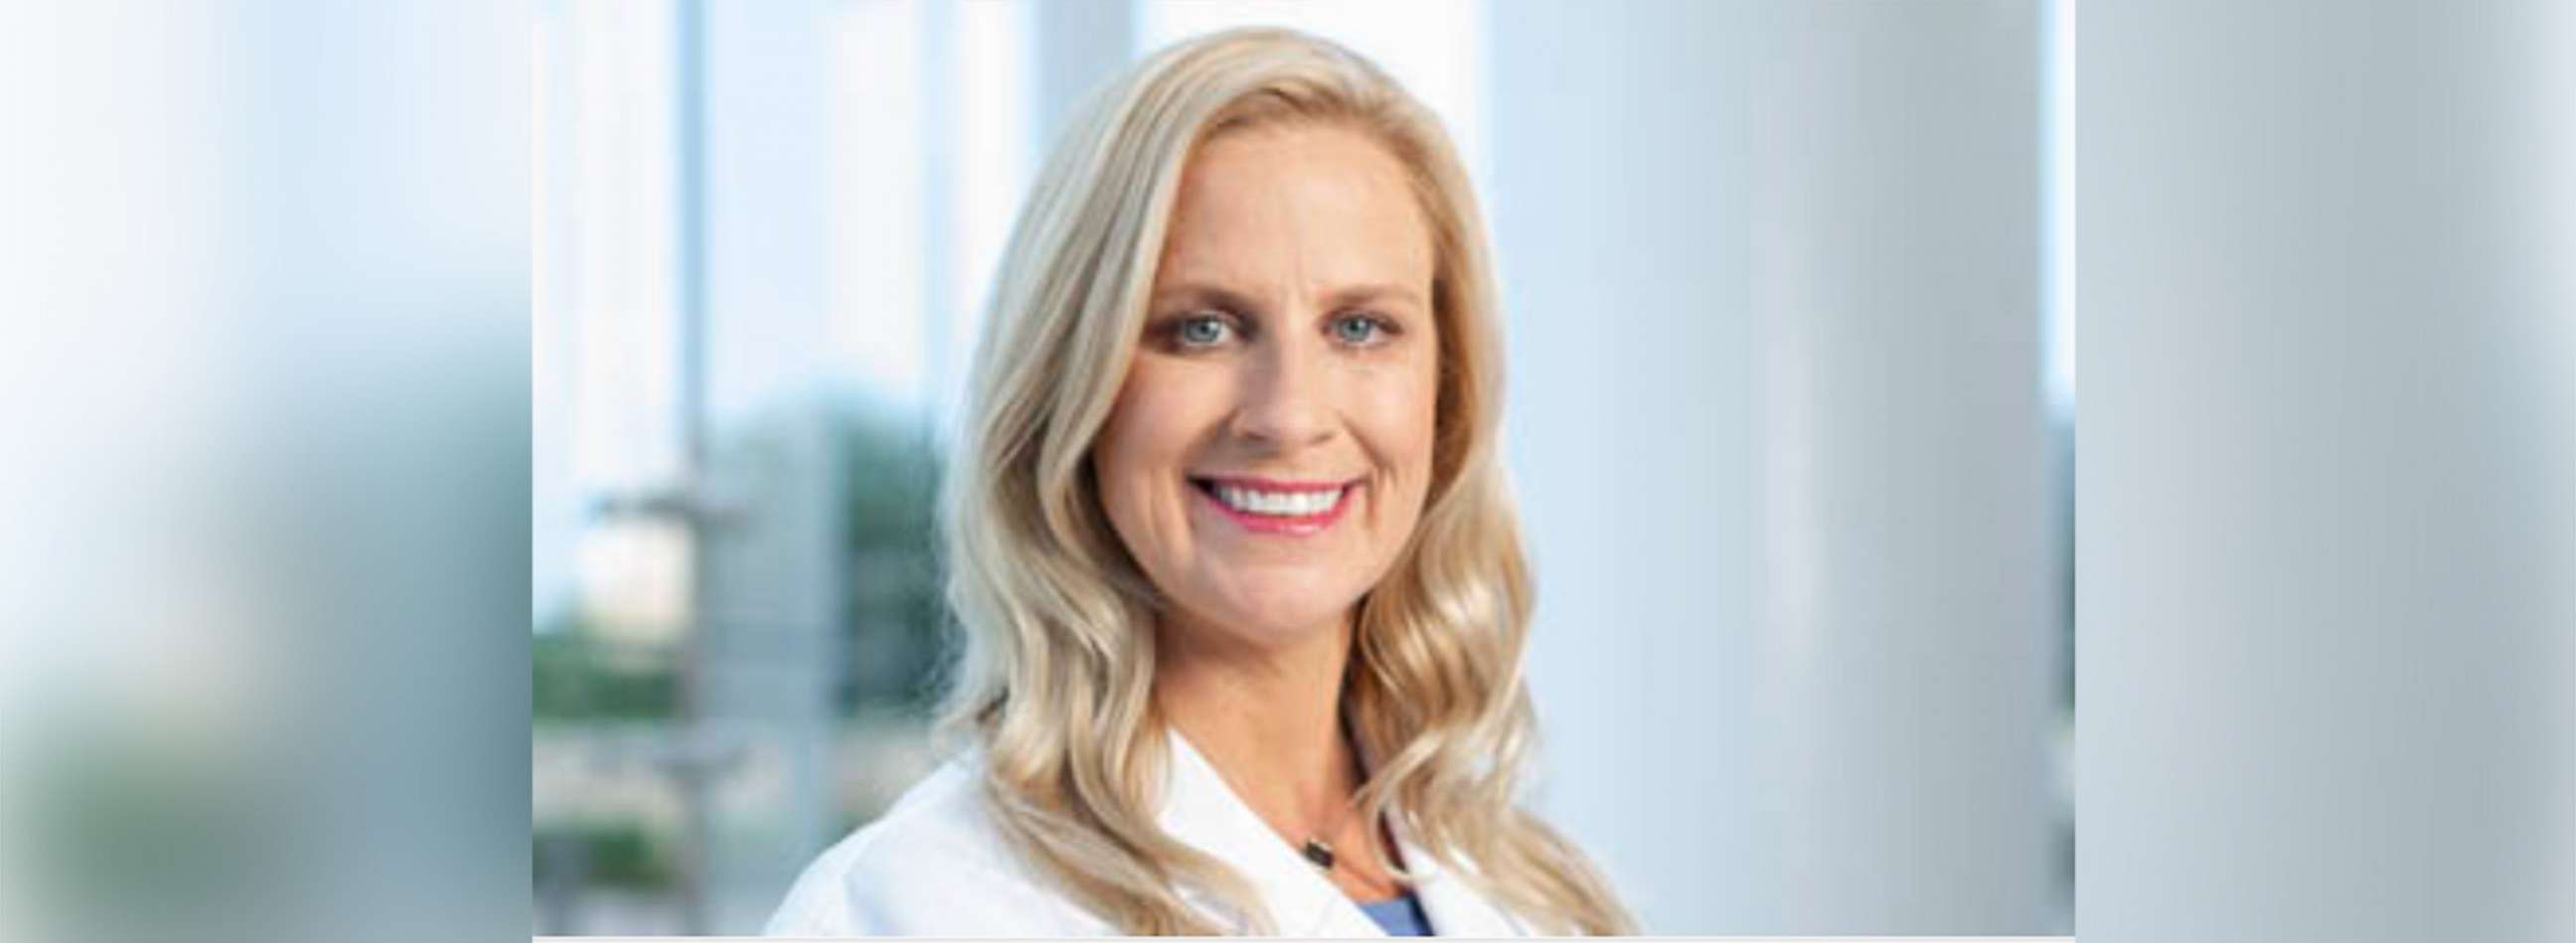 PHOTO: Dr. Stephanie Husen, one of the victims in the June 1st shootings by alleged gunman Michael Louis at the Natalie Building at Saint Francis Hospital, Tulsa, Okla., is seen in an official staff portrait.